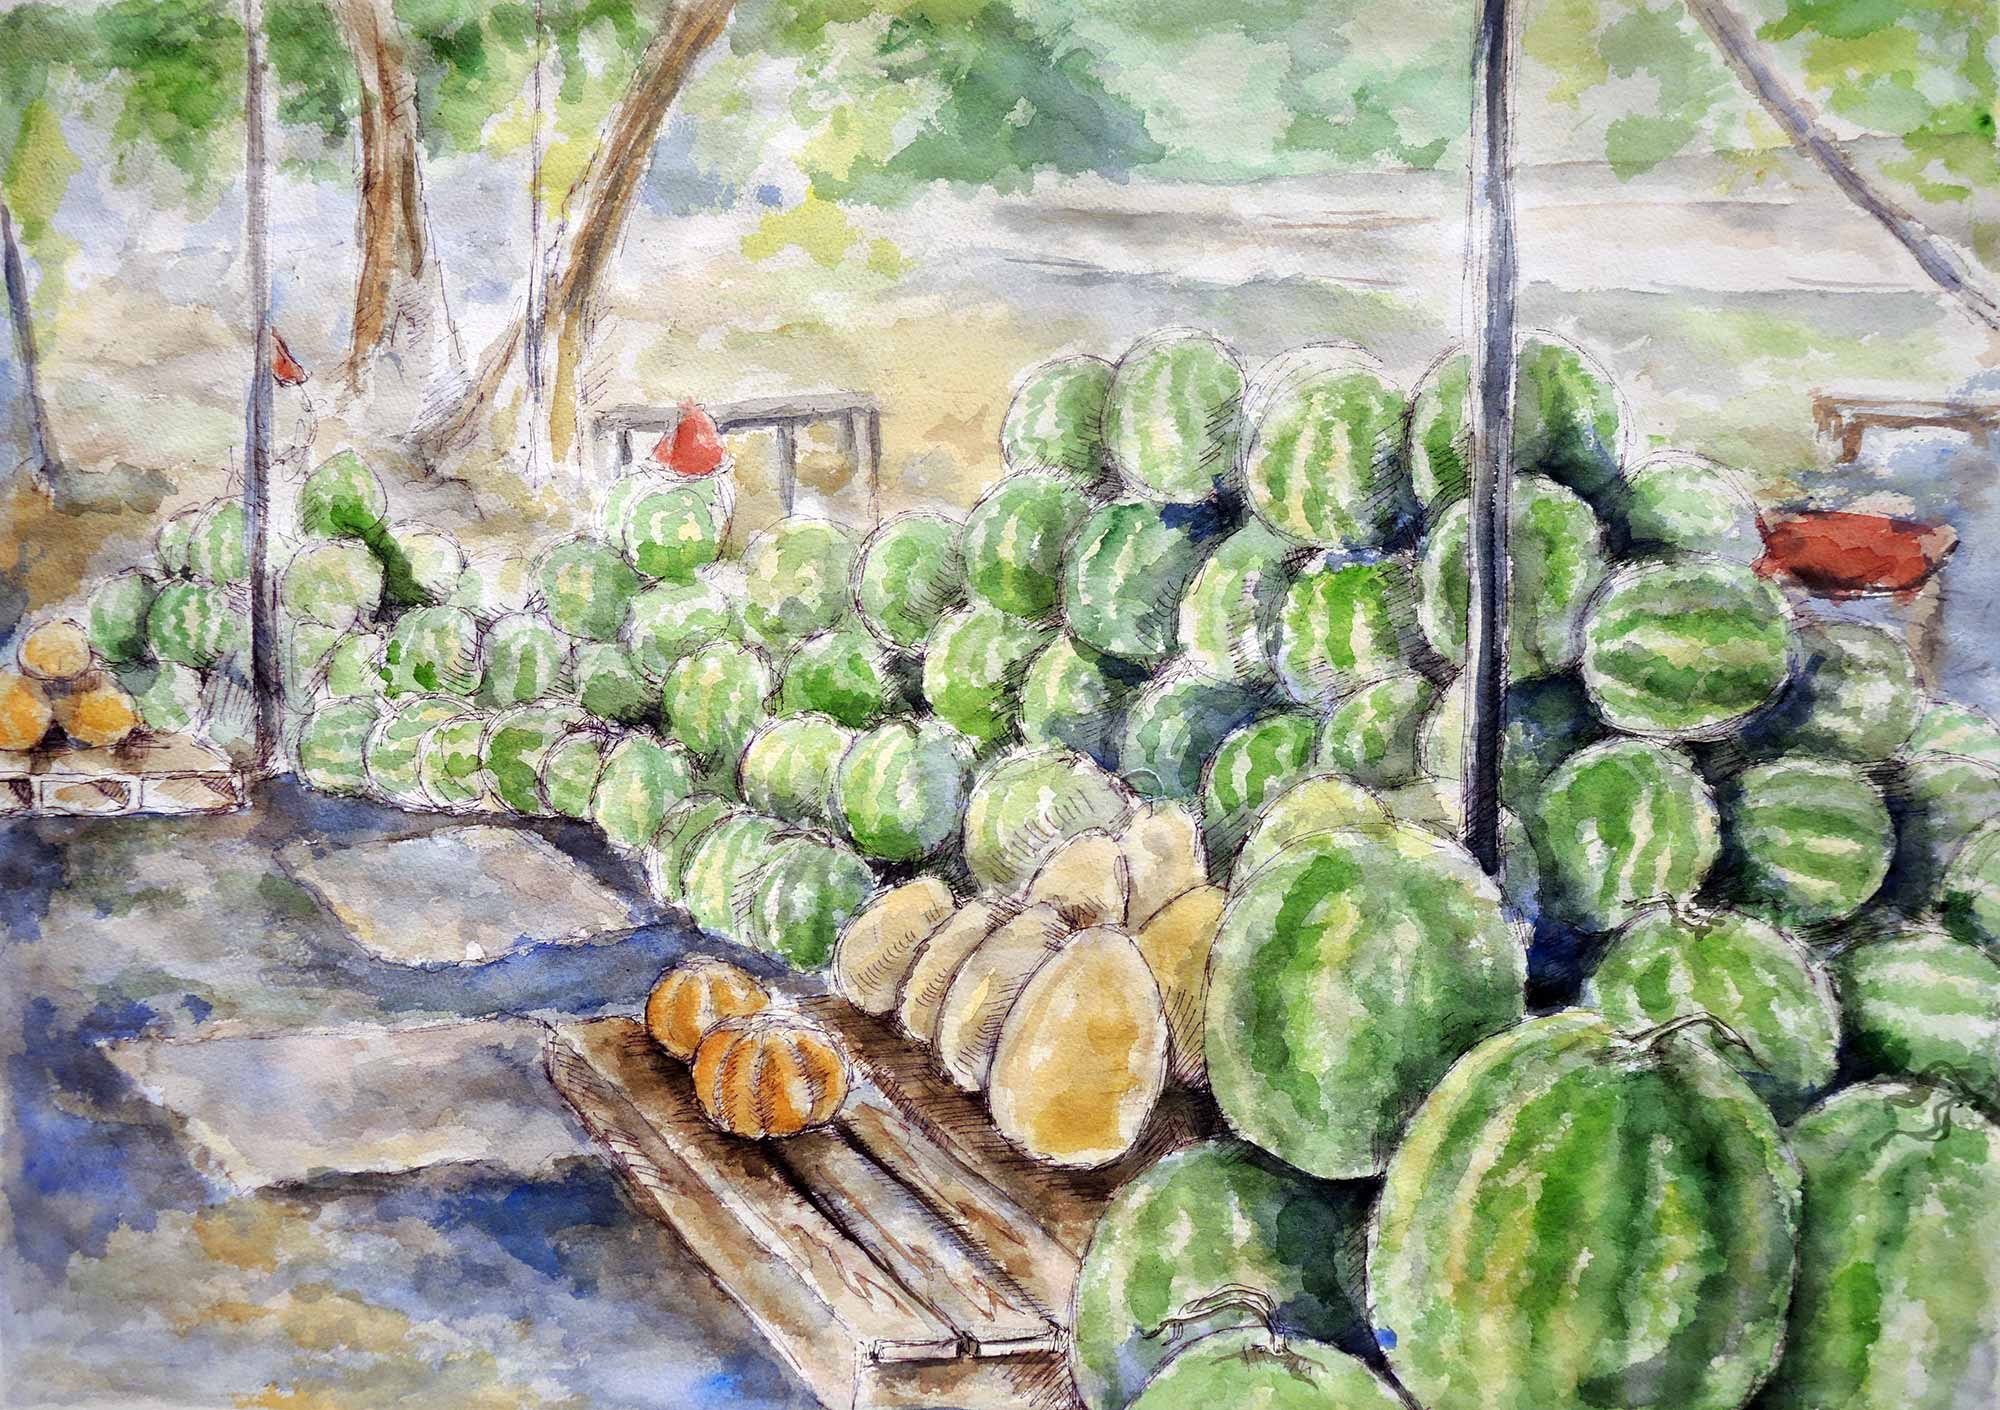 A painting of watermelons